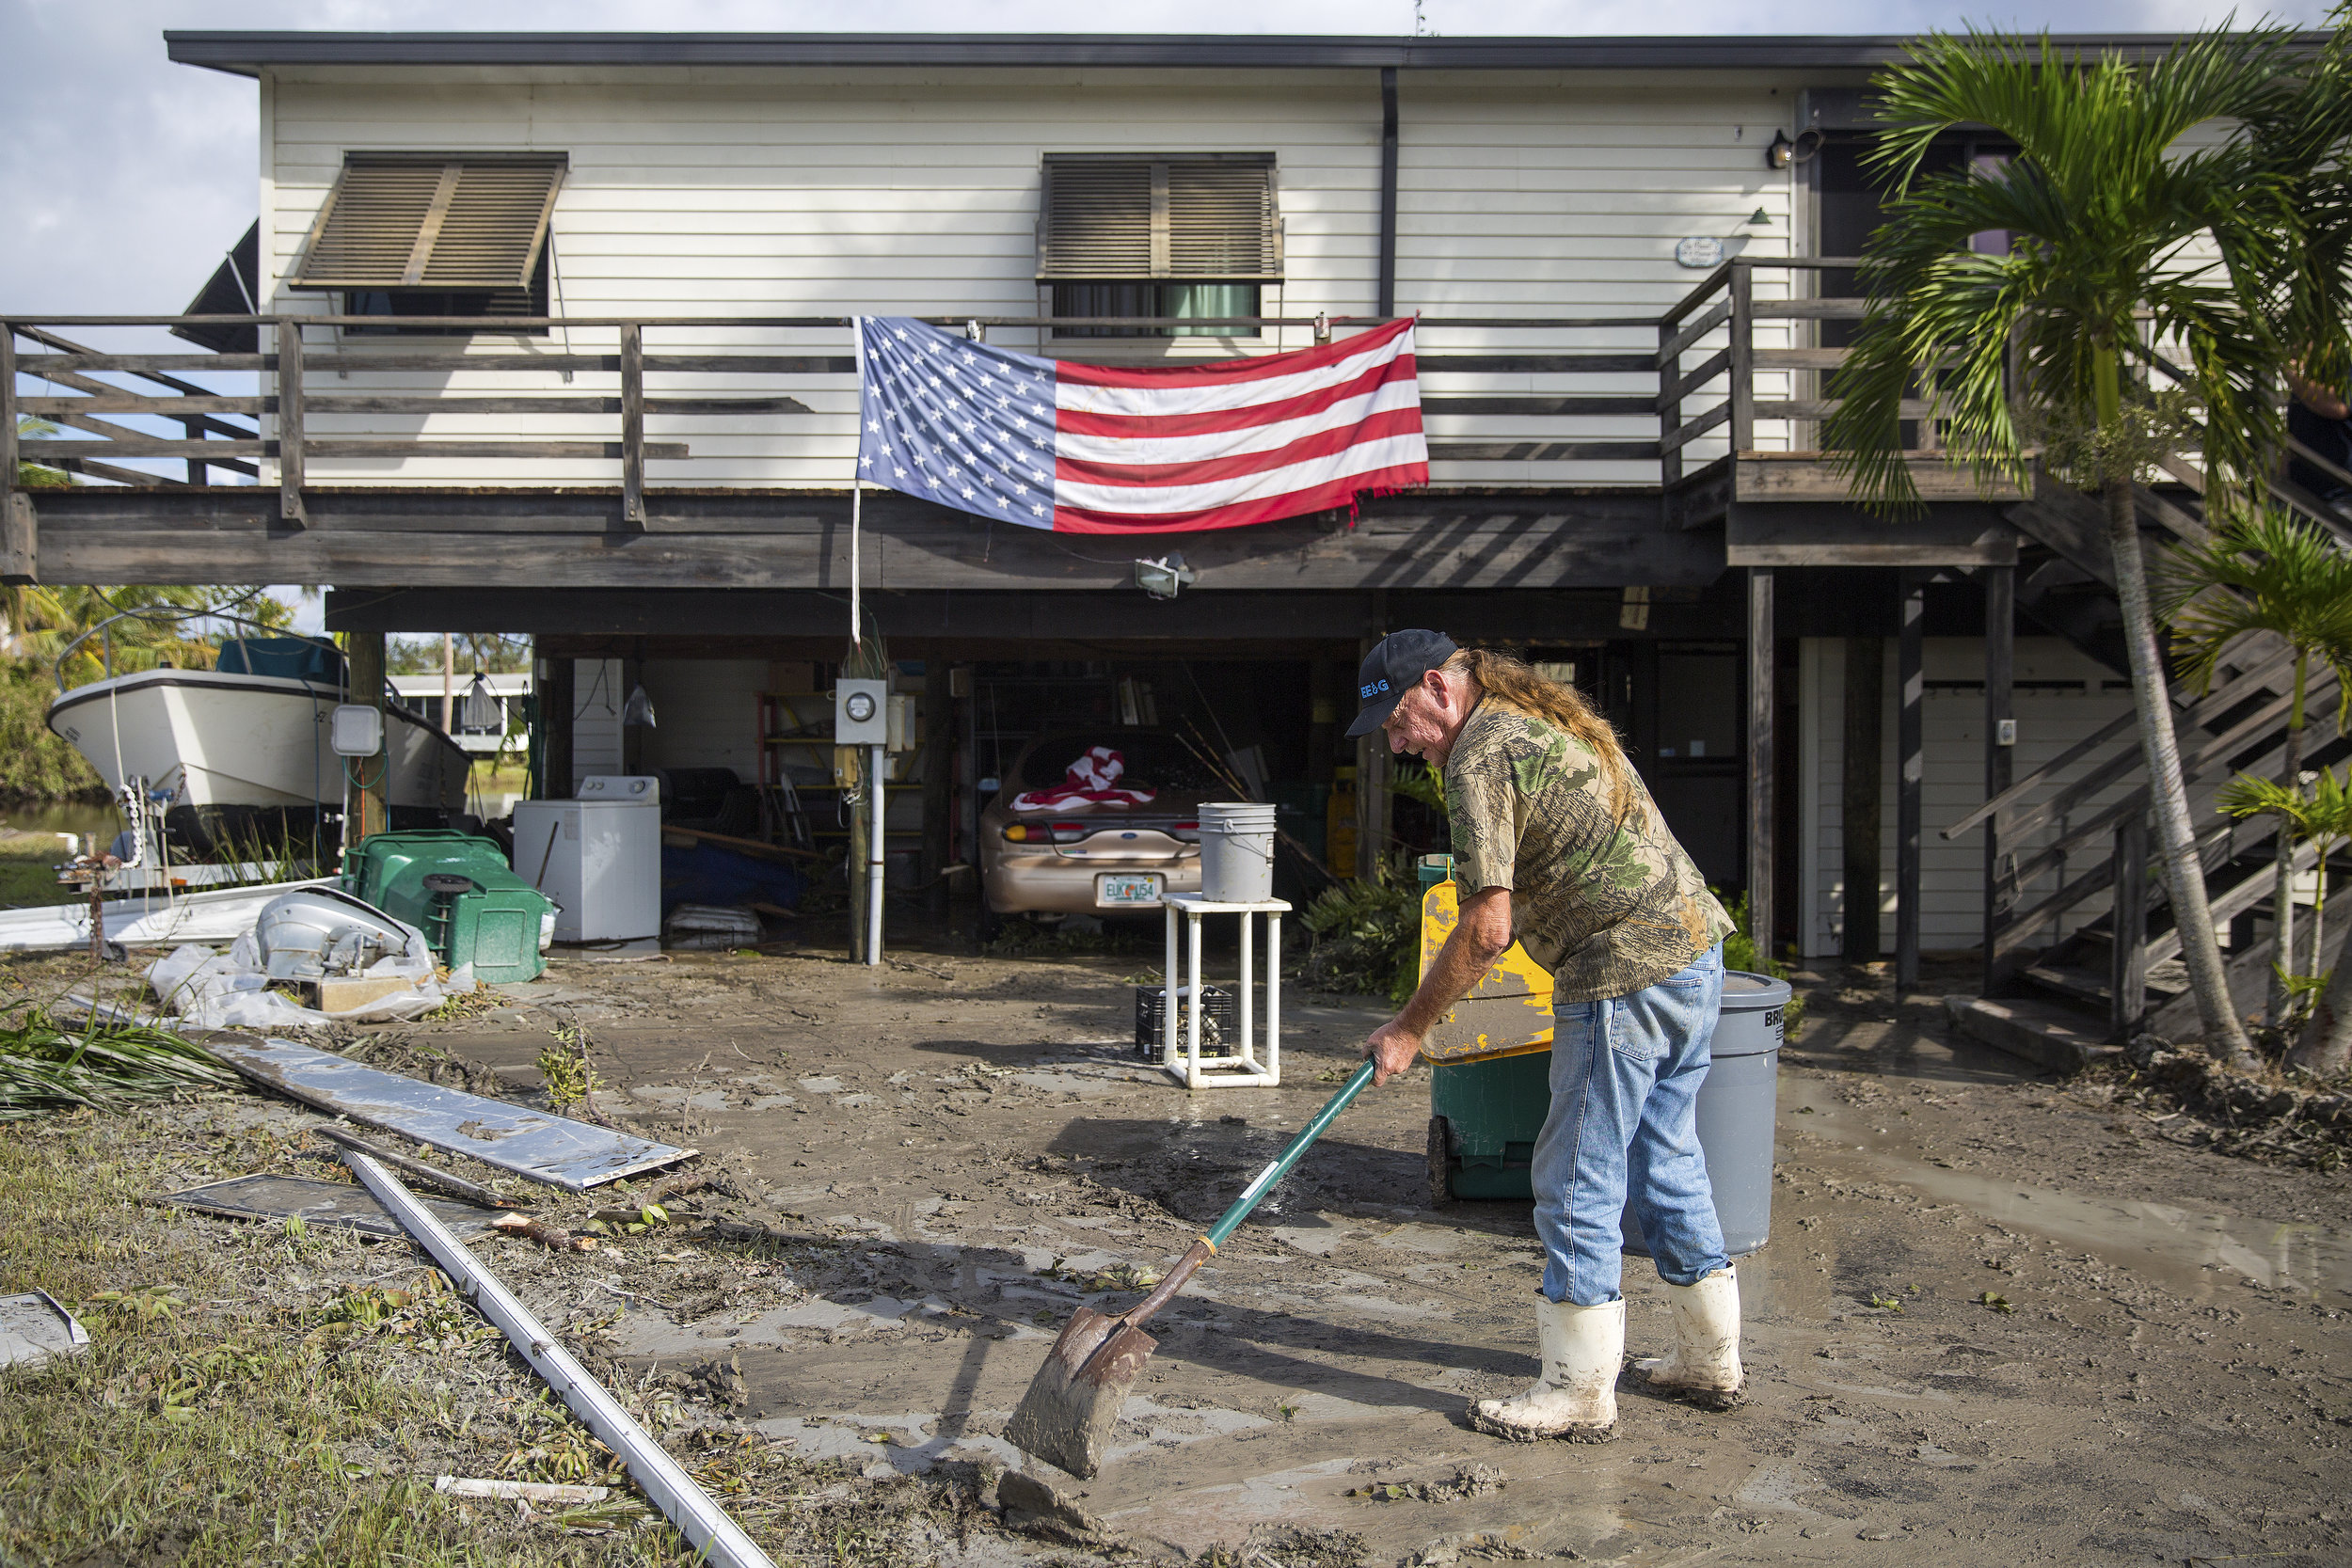  Harvey Pennell works to shovel a thick layer of mud from the driveway of his home in Plantation Island, an unincorporated area nearby Everglades City, as Collier County began picking up the pieces in the aftermath of Hurricane Irma on Tuesday, Septe